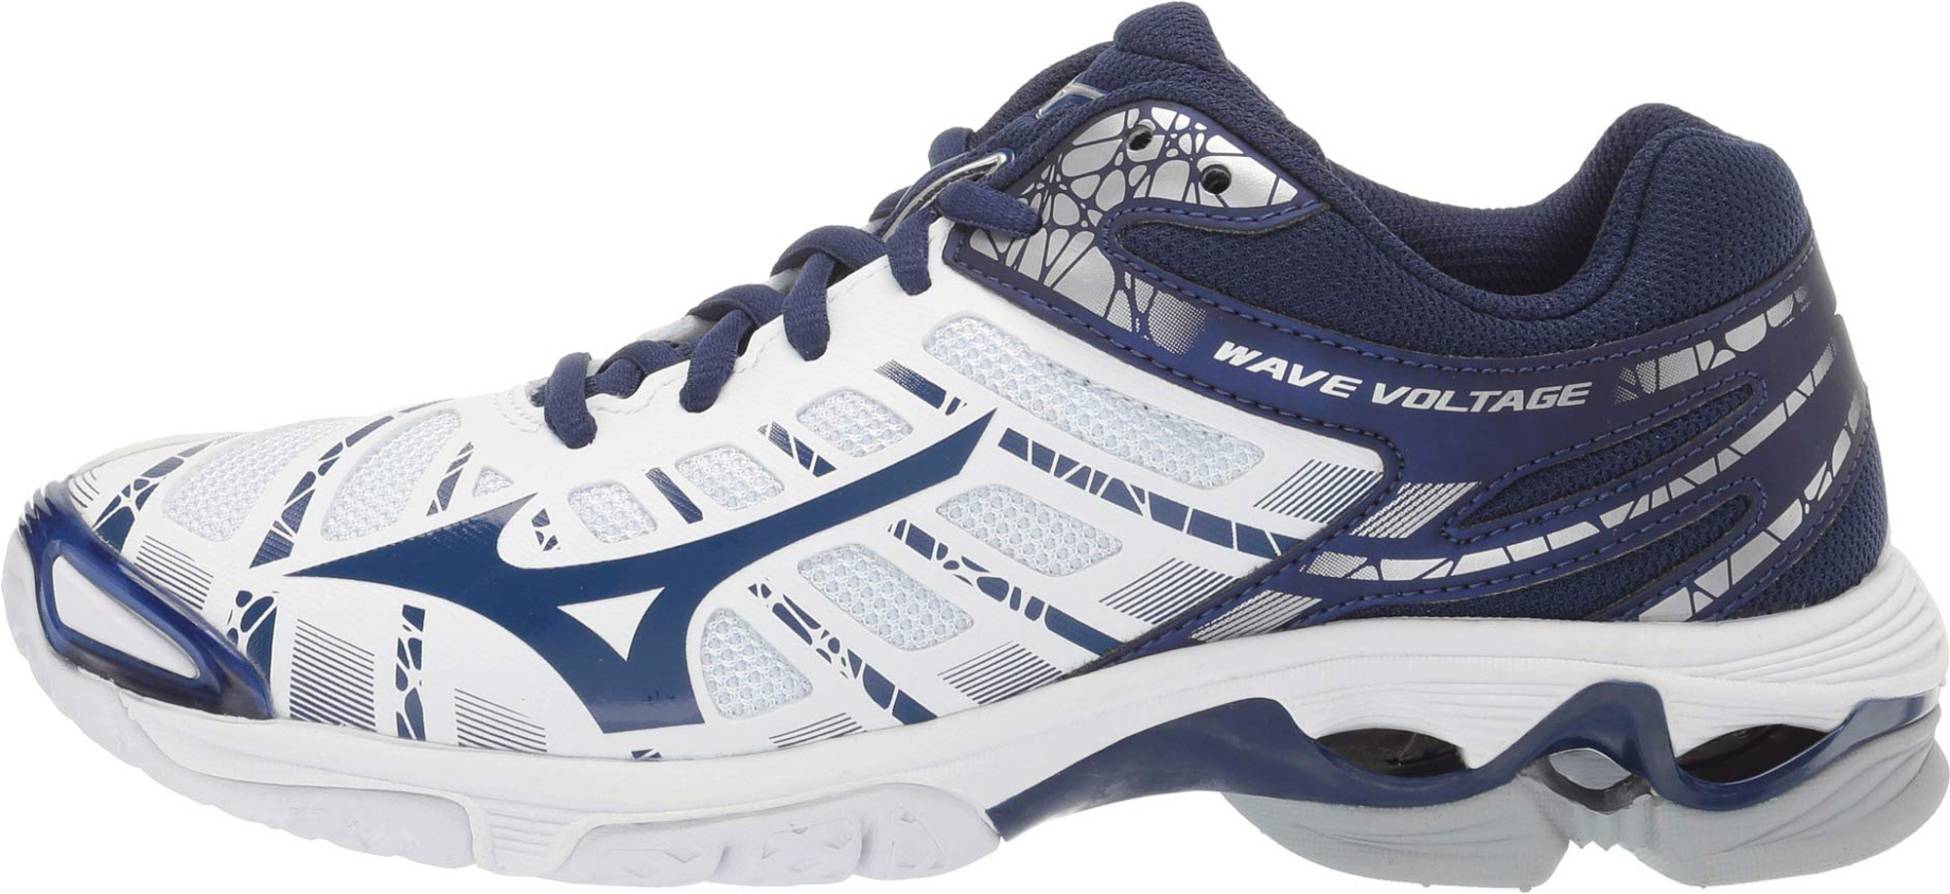 Save 47% on Mizuno Volleyball Shoes (10 